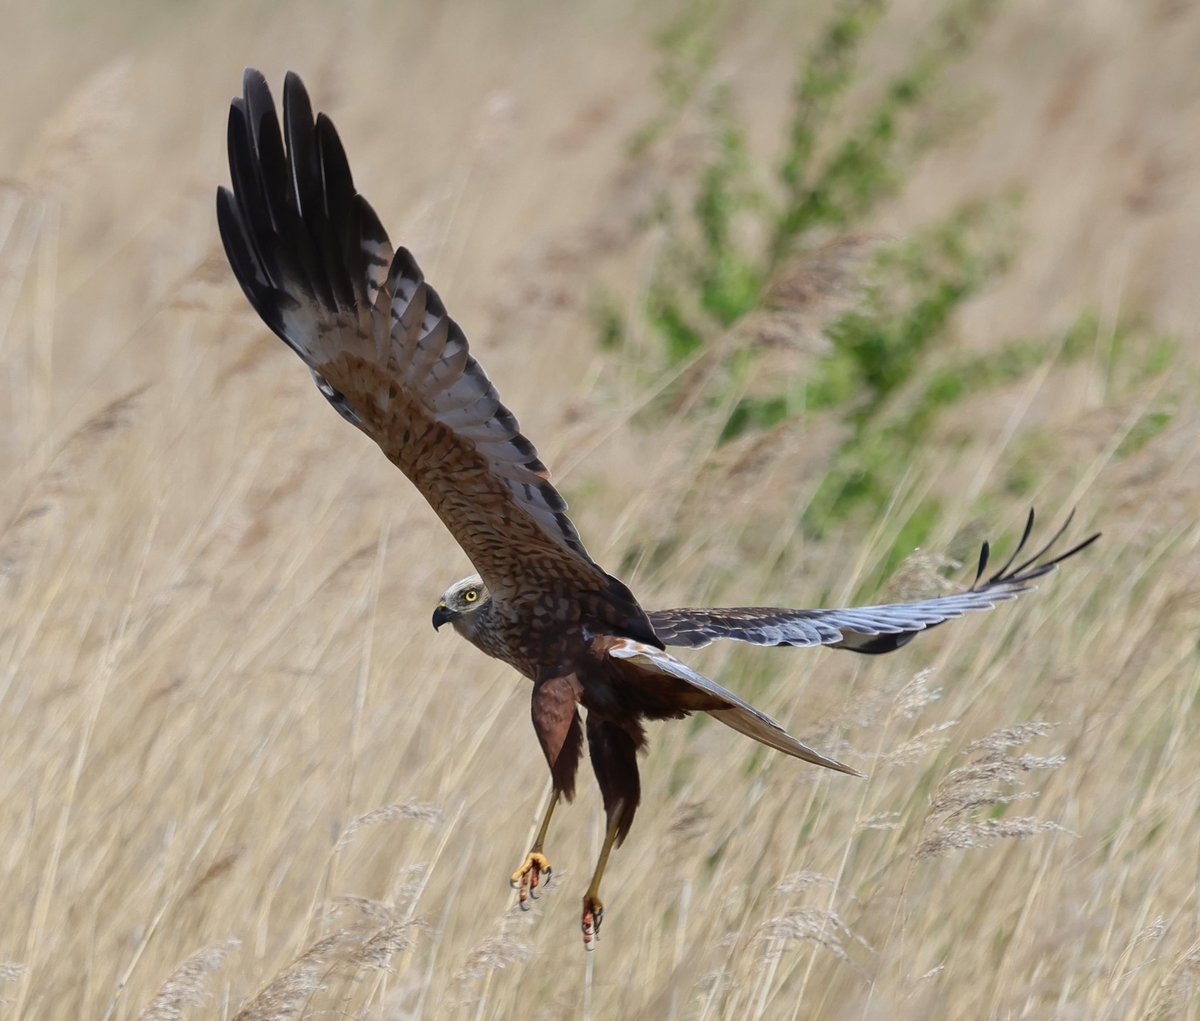 The best afternoon at Minsmere. This stunning male Marsh Harrier dropped into the reeds in front of me along the North Wall. I've never been so close to a Marsh Harrier. A truly thrilling moment. @RSPBMinsmere @RSPBEngland @suffolksnaps @SWT_NE_Reserves @WildlifeMag